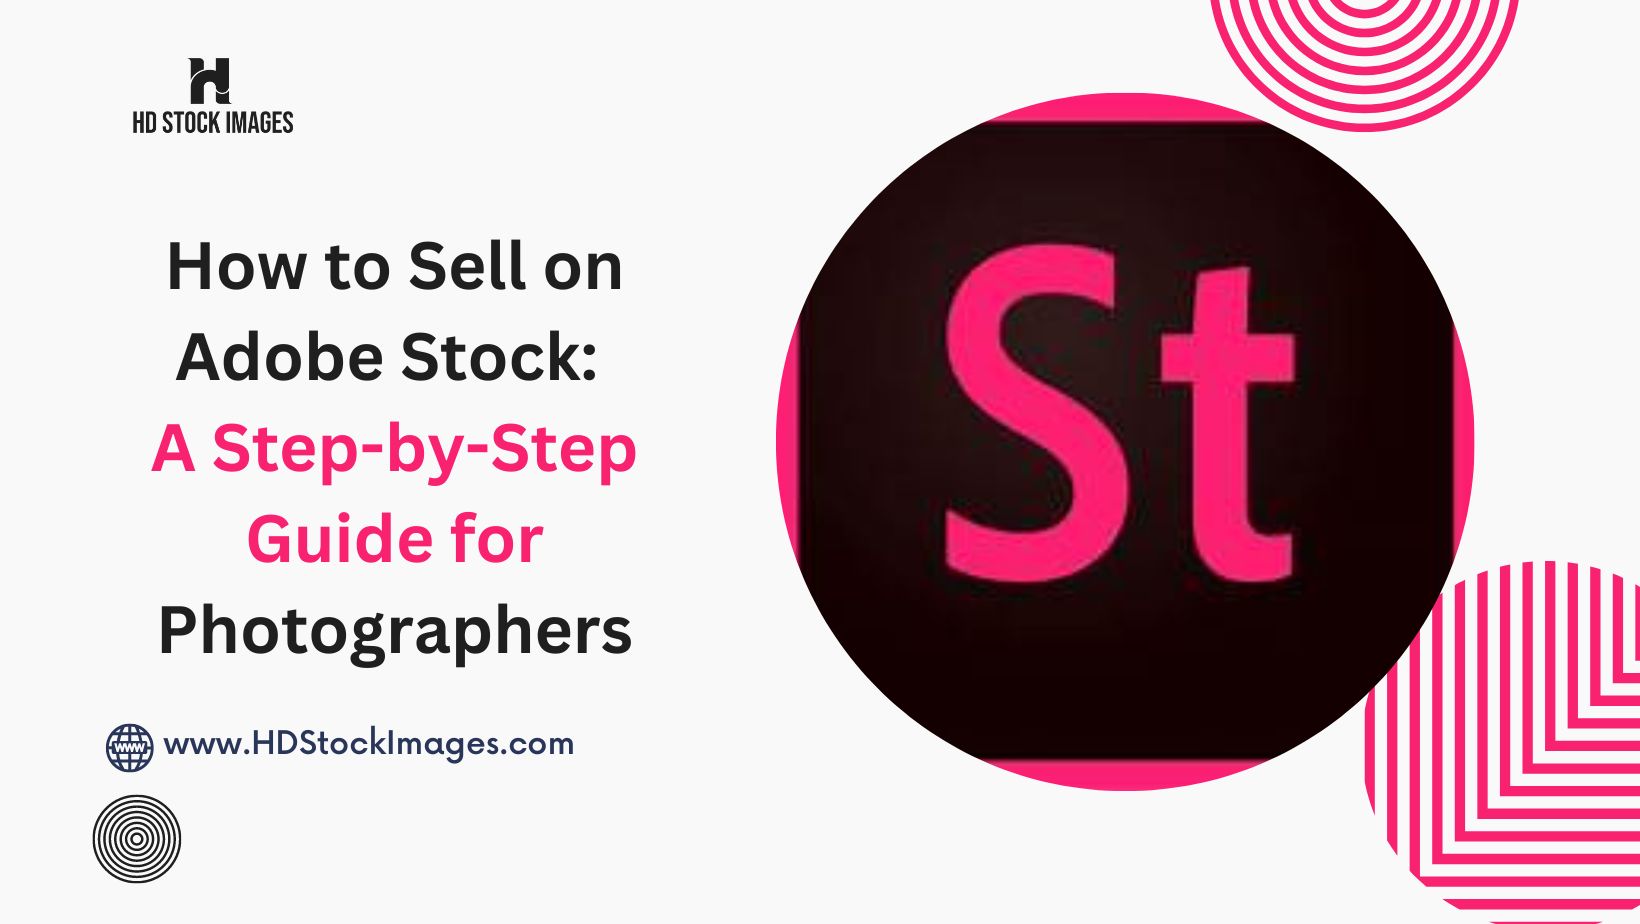 An image of How to Sell on Adobe Stock: A Step-by-Step Guide for Photographers